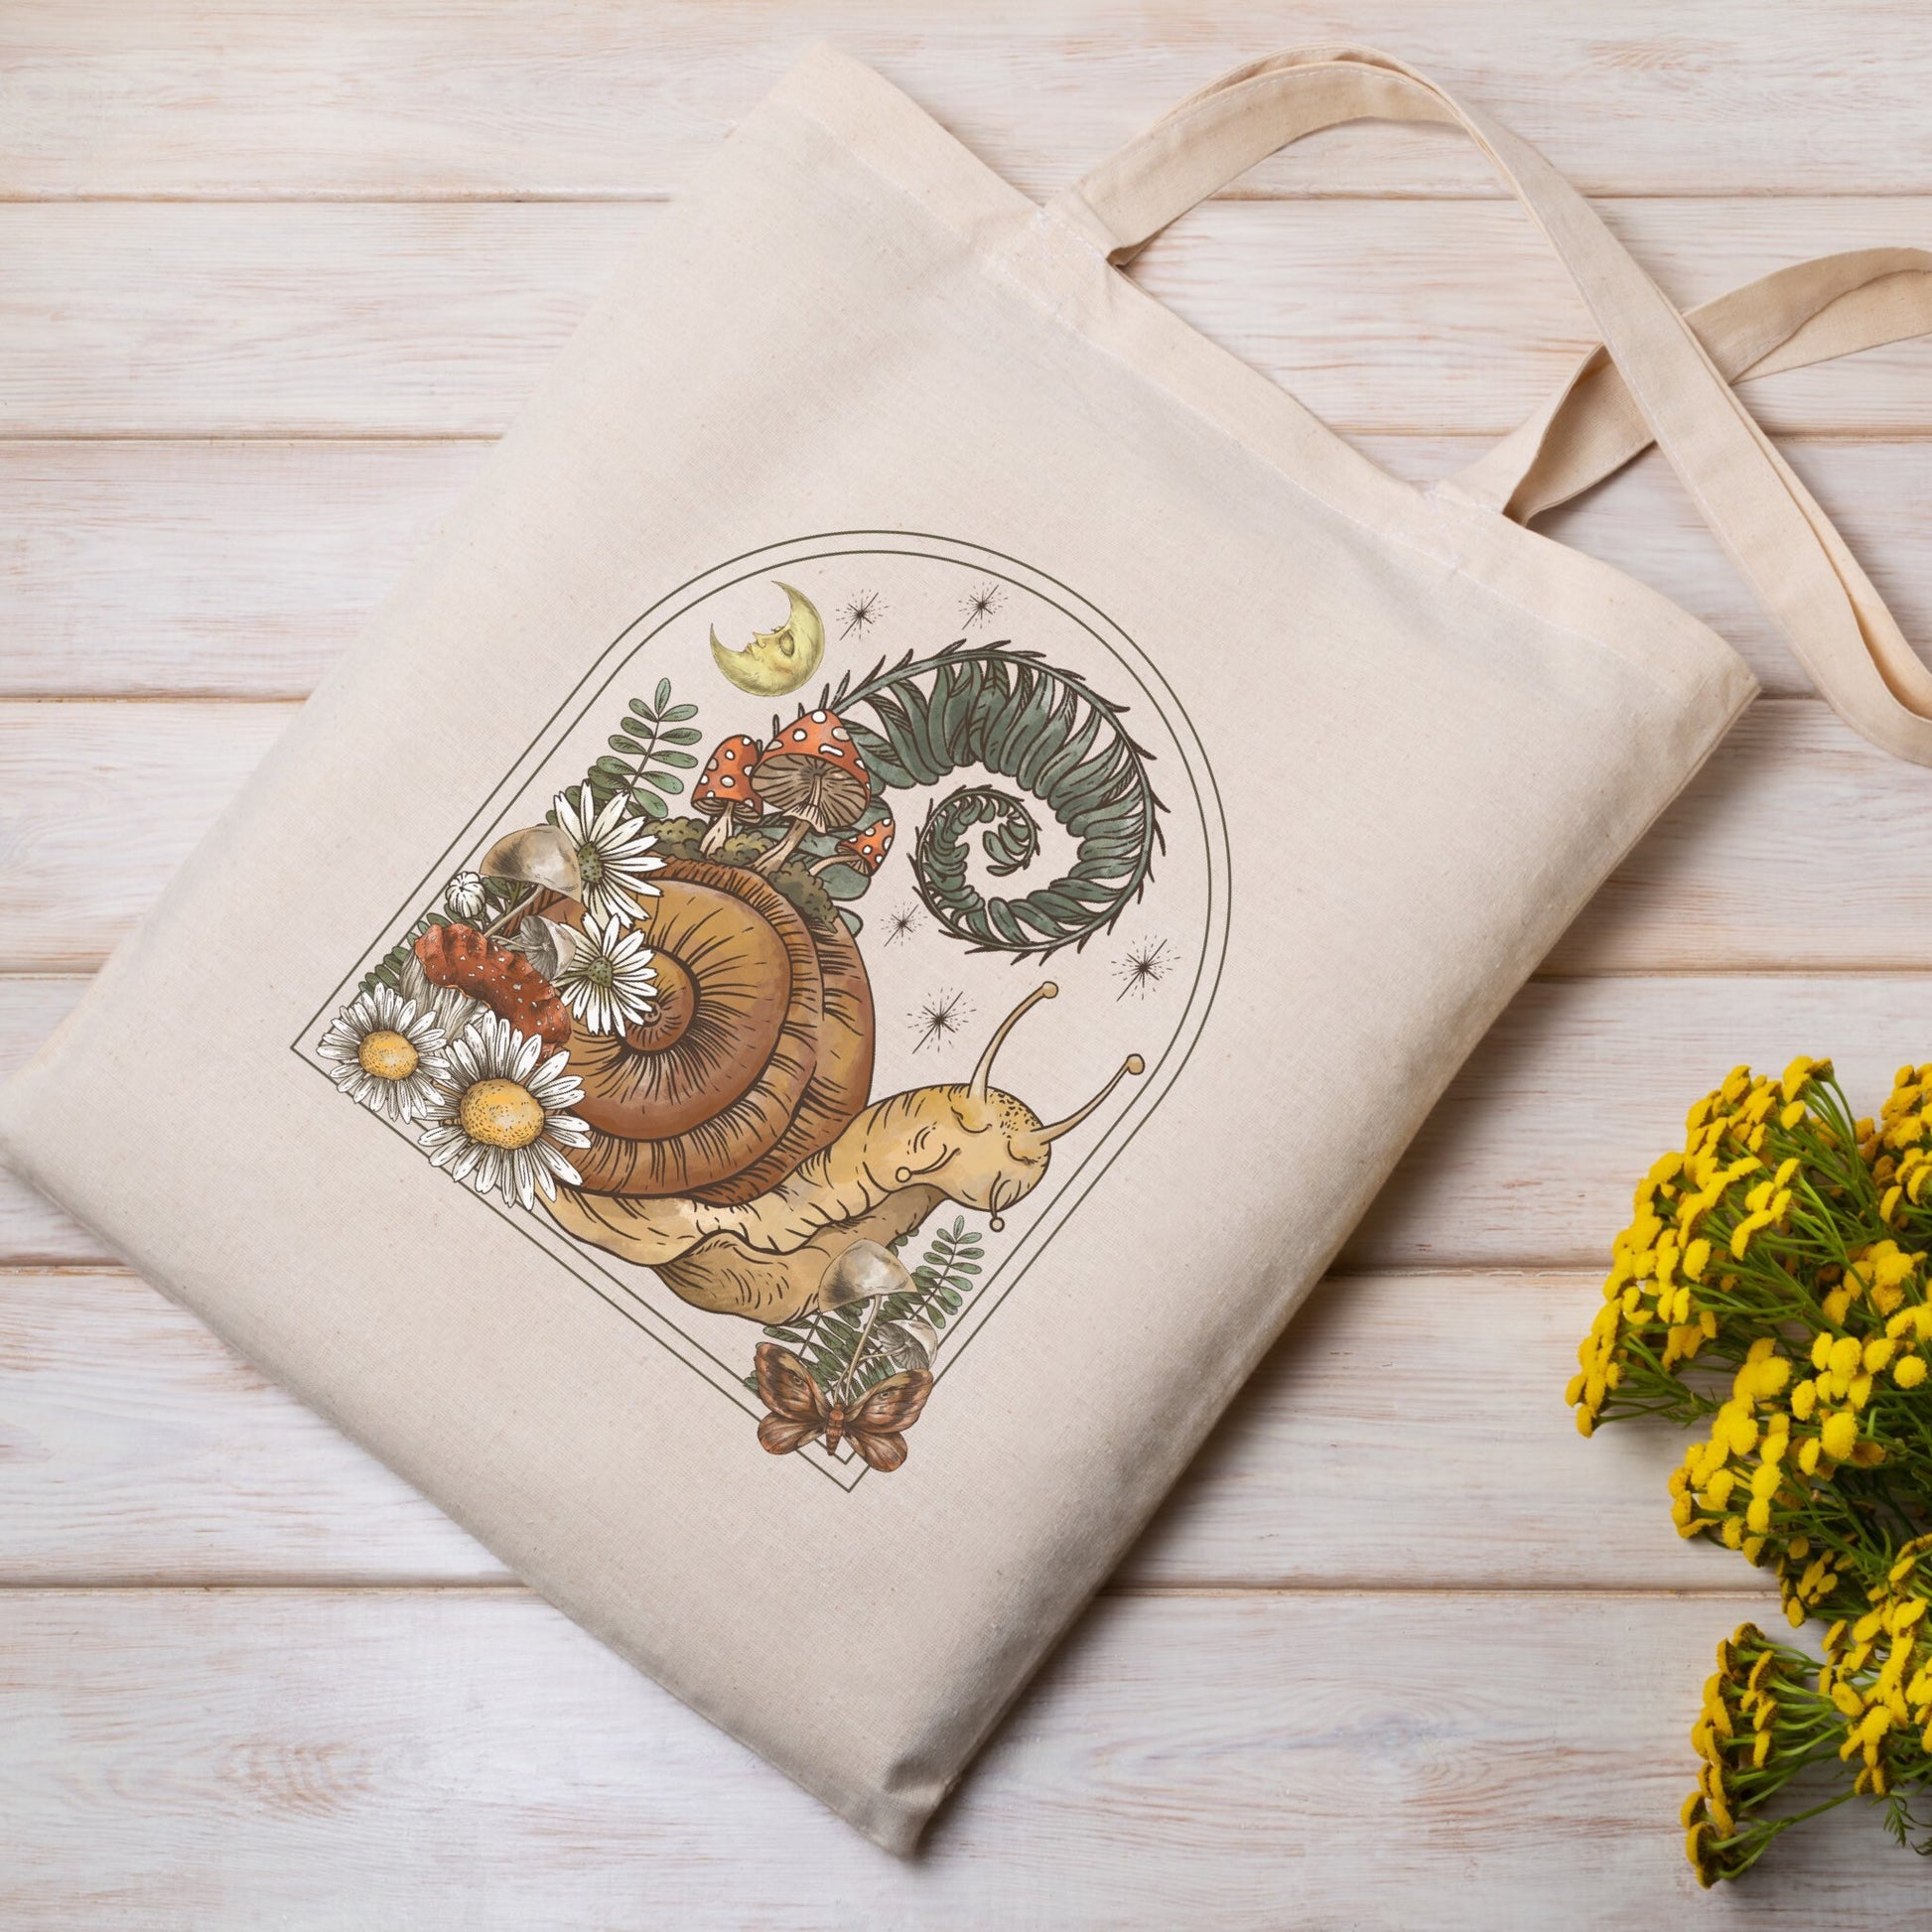 Snail Tote Bag Mushroom Tote Bag Lightweight Cotton Tote Witchy Goblincore Cottagecore Tote Bag Moth Fairy Grunge Fairycore Nature Tote Bag